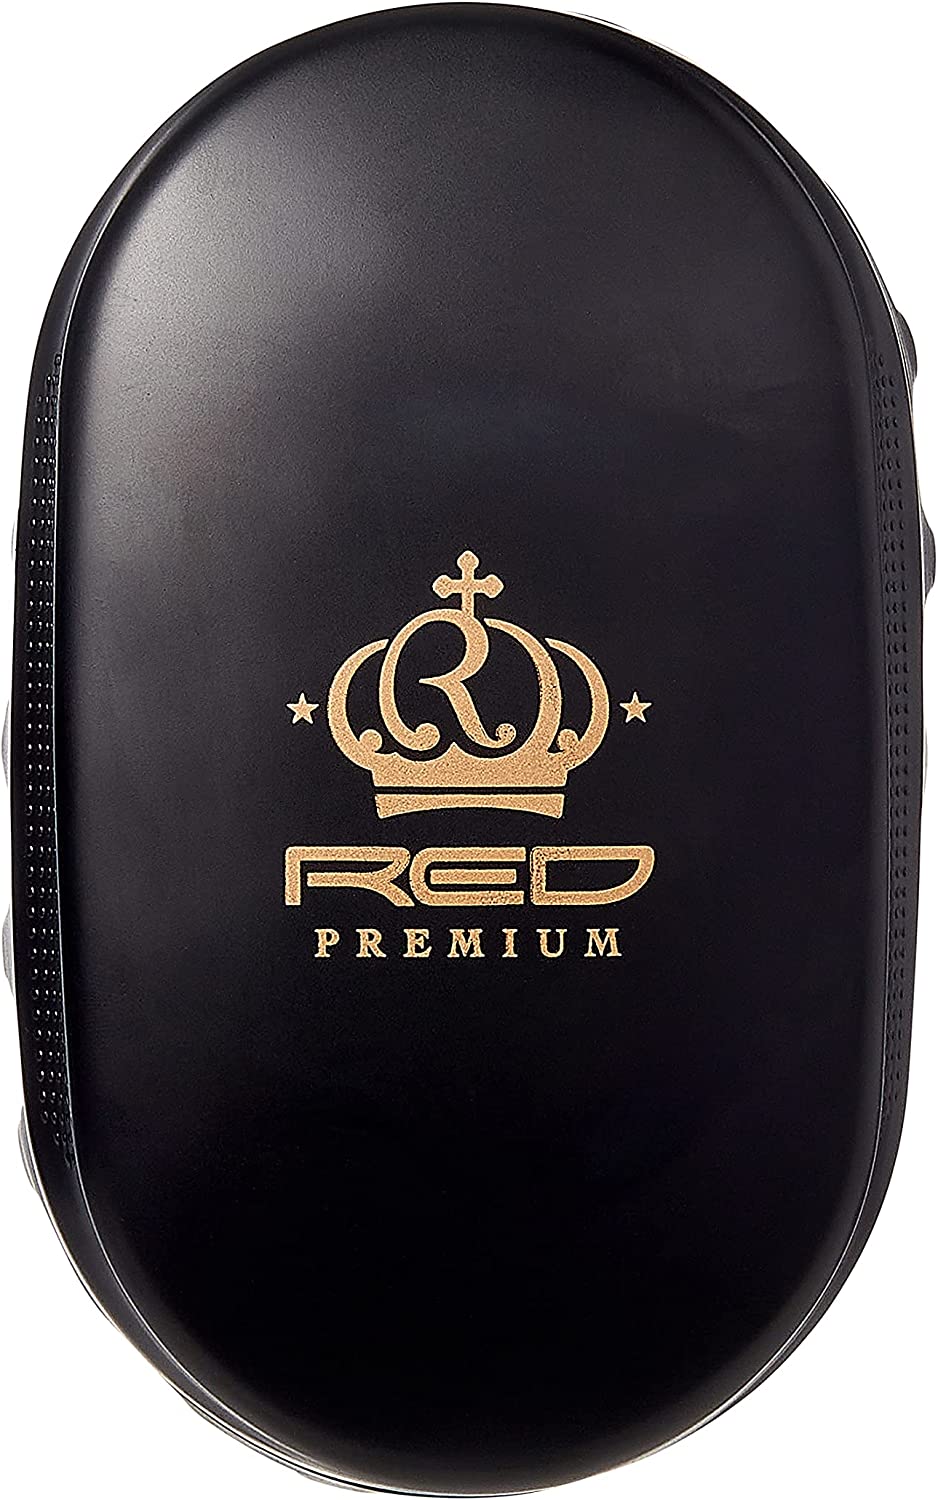 Red by Kiss Premium Twist King Luxury Twist Styler (Large) - Washable & Durable